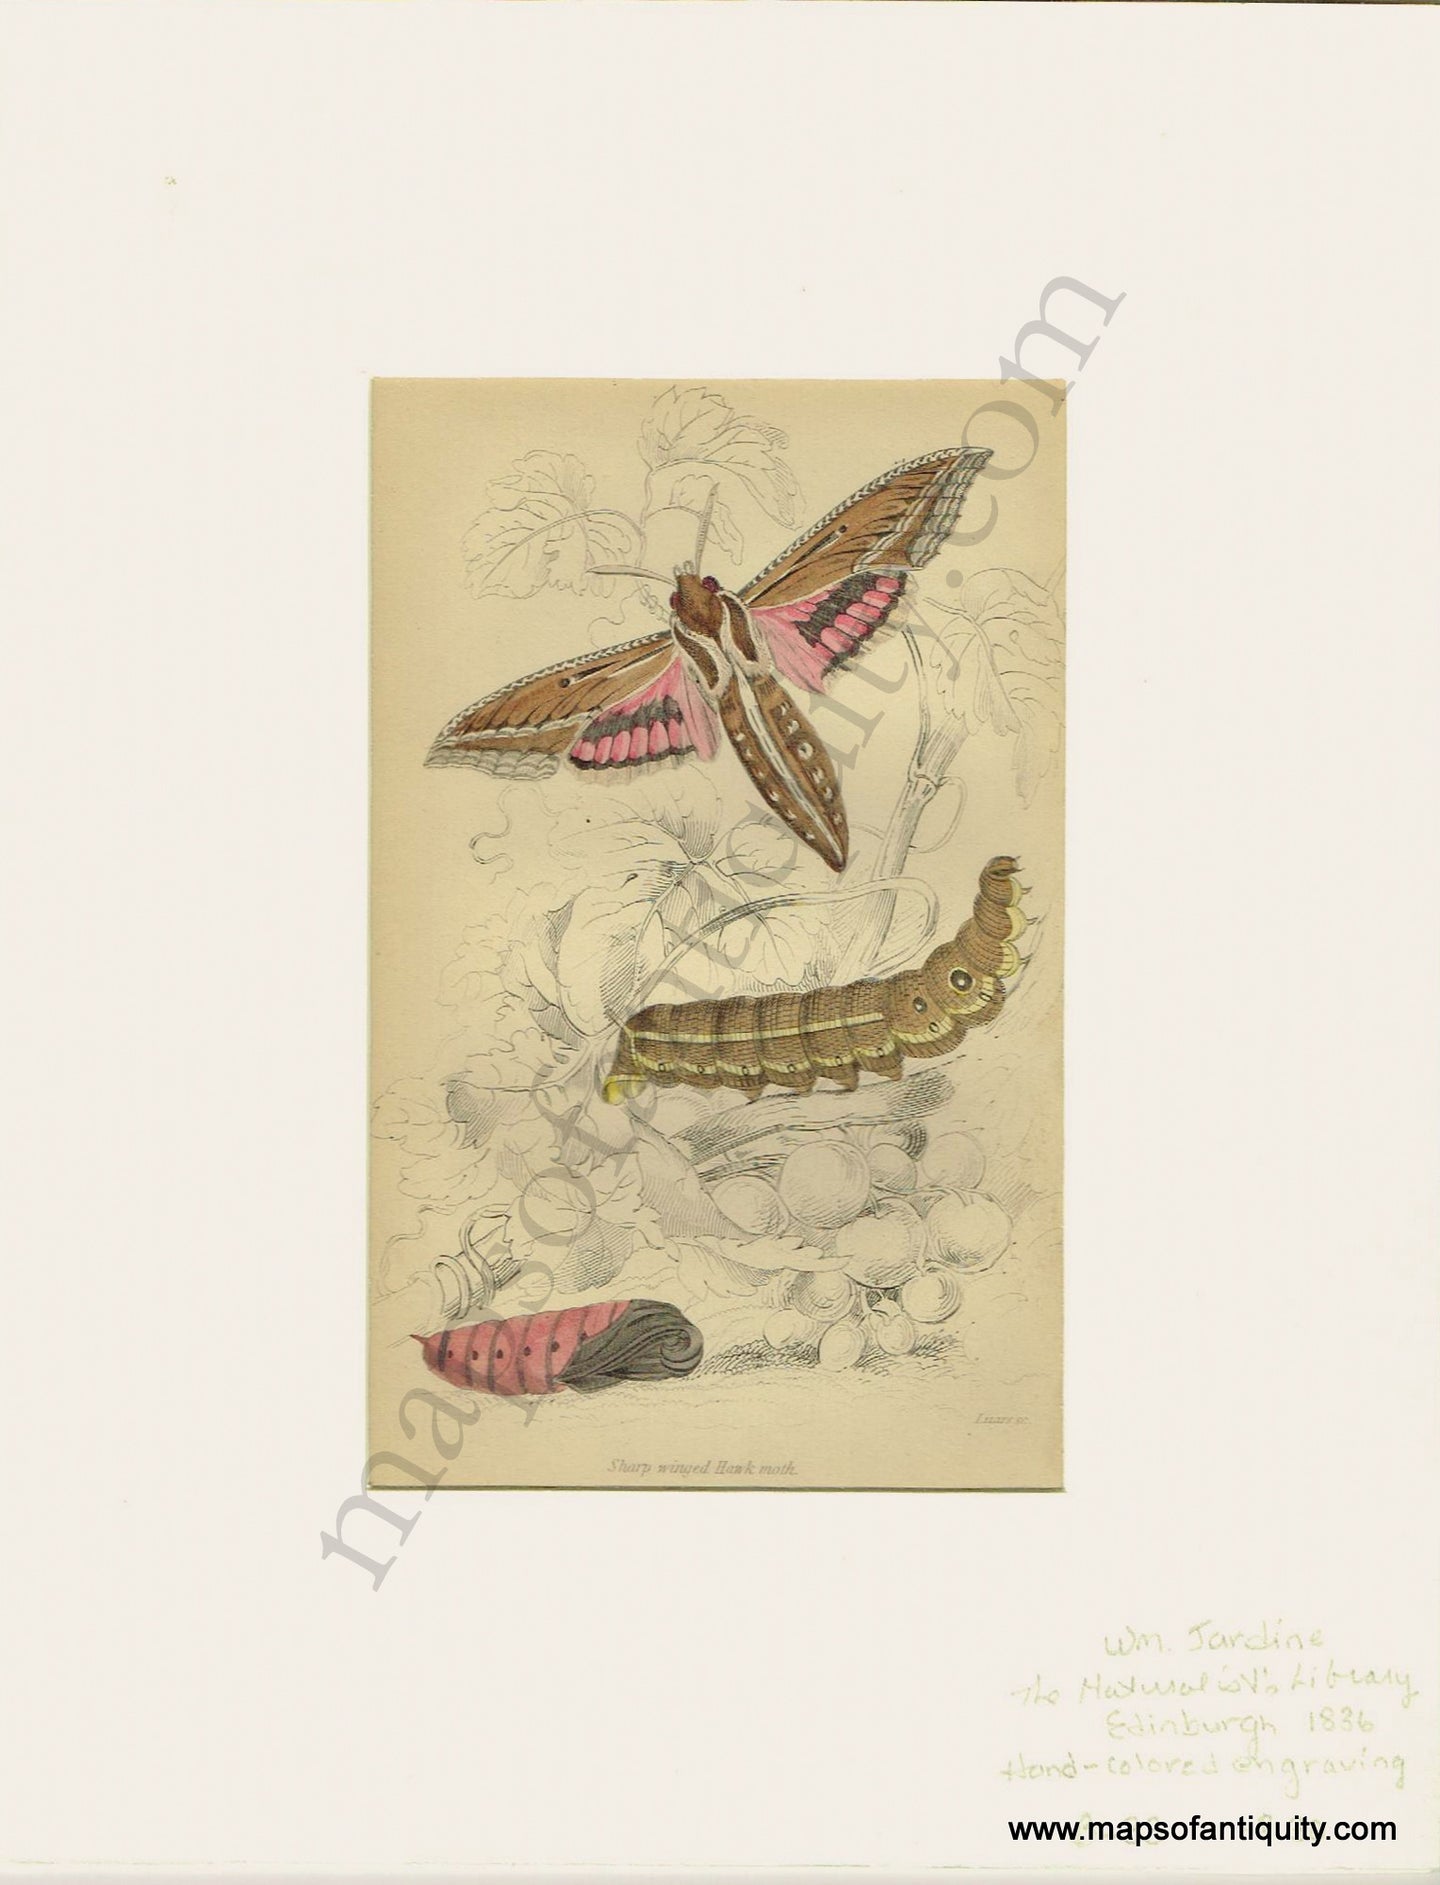 Antique-Print-Prints-Illustration-Illustrations-Engraved-Engraving-Engravings-Sharp-Winged-Hawk-Moth-Moths-Butterfly-Butterflies-Insects-Bugs-Natural-History-Diagram-Diagrams-Naturalist's-Library-Jardine-1836-1830s-1800s-Early-Mid-19th-Century-Maps-of-Antiquity